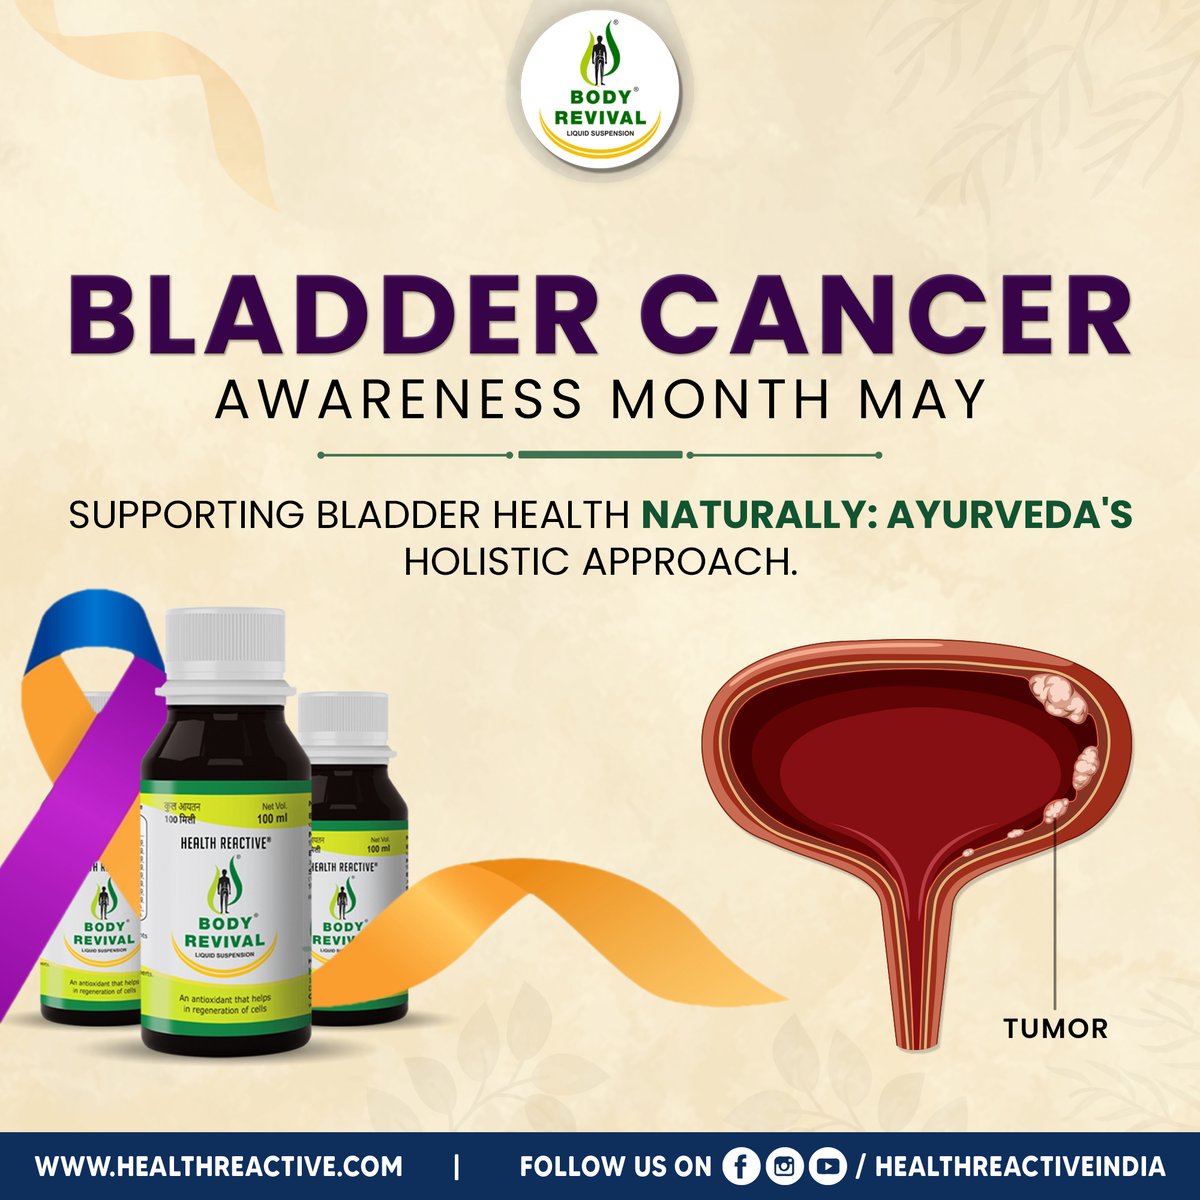 Raise bladder cancer awareness: Know the signs, get screened early, and support those affected. Together, we can make a difference in prevention.

For More Follow Us
healthreactive.com

#immunebooster #HealthReactive #bodyrevival #DrMunirKhan
#BladderCancerAwareness